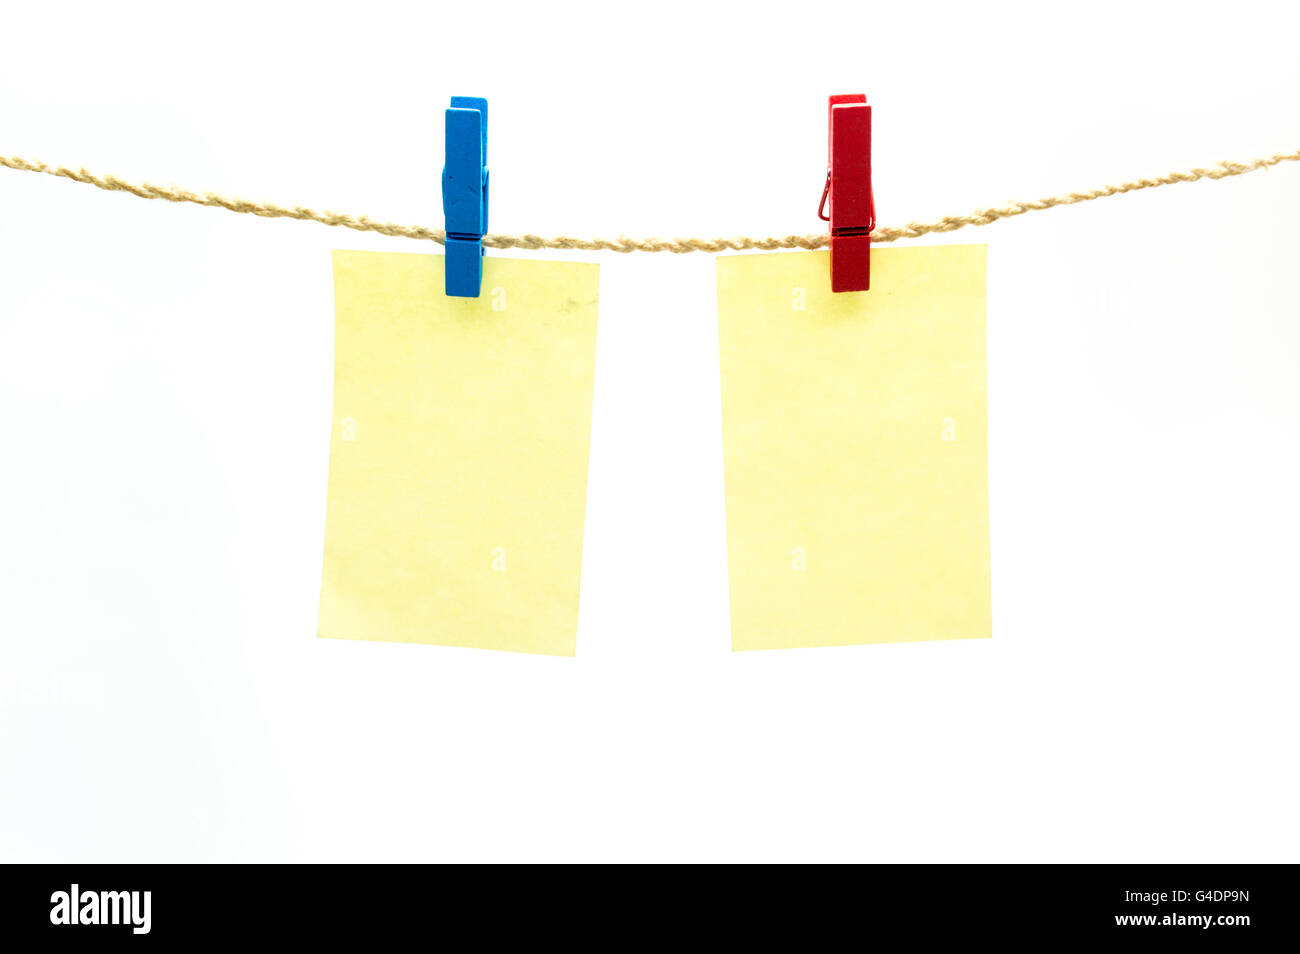 Red and blub clothespins and yellow note paper hanging on rope isolated white background Stock Photo